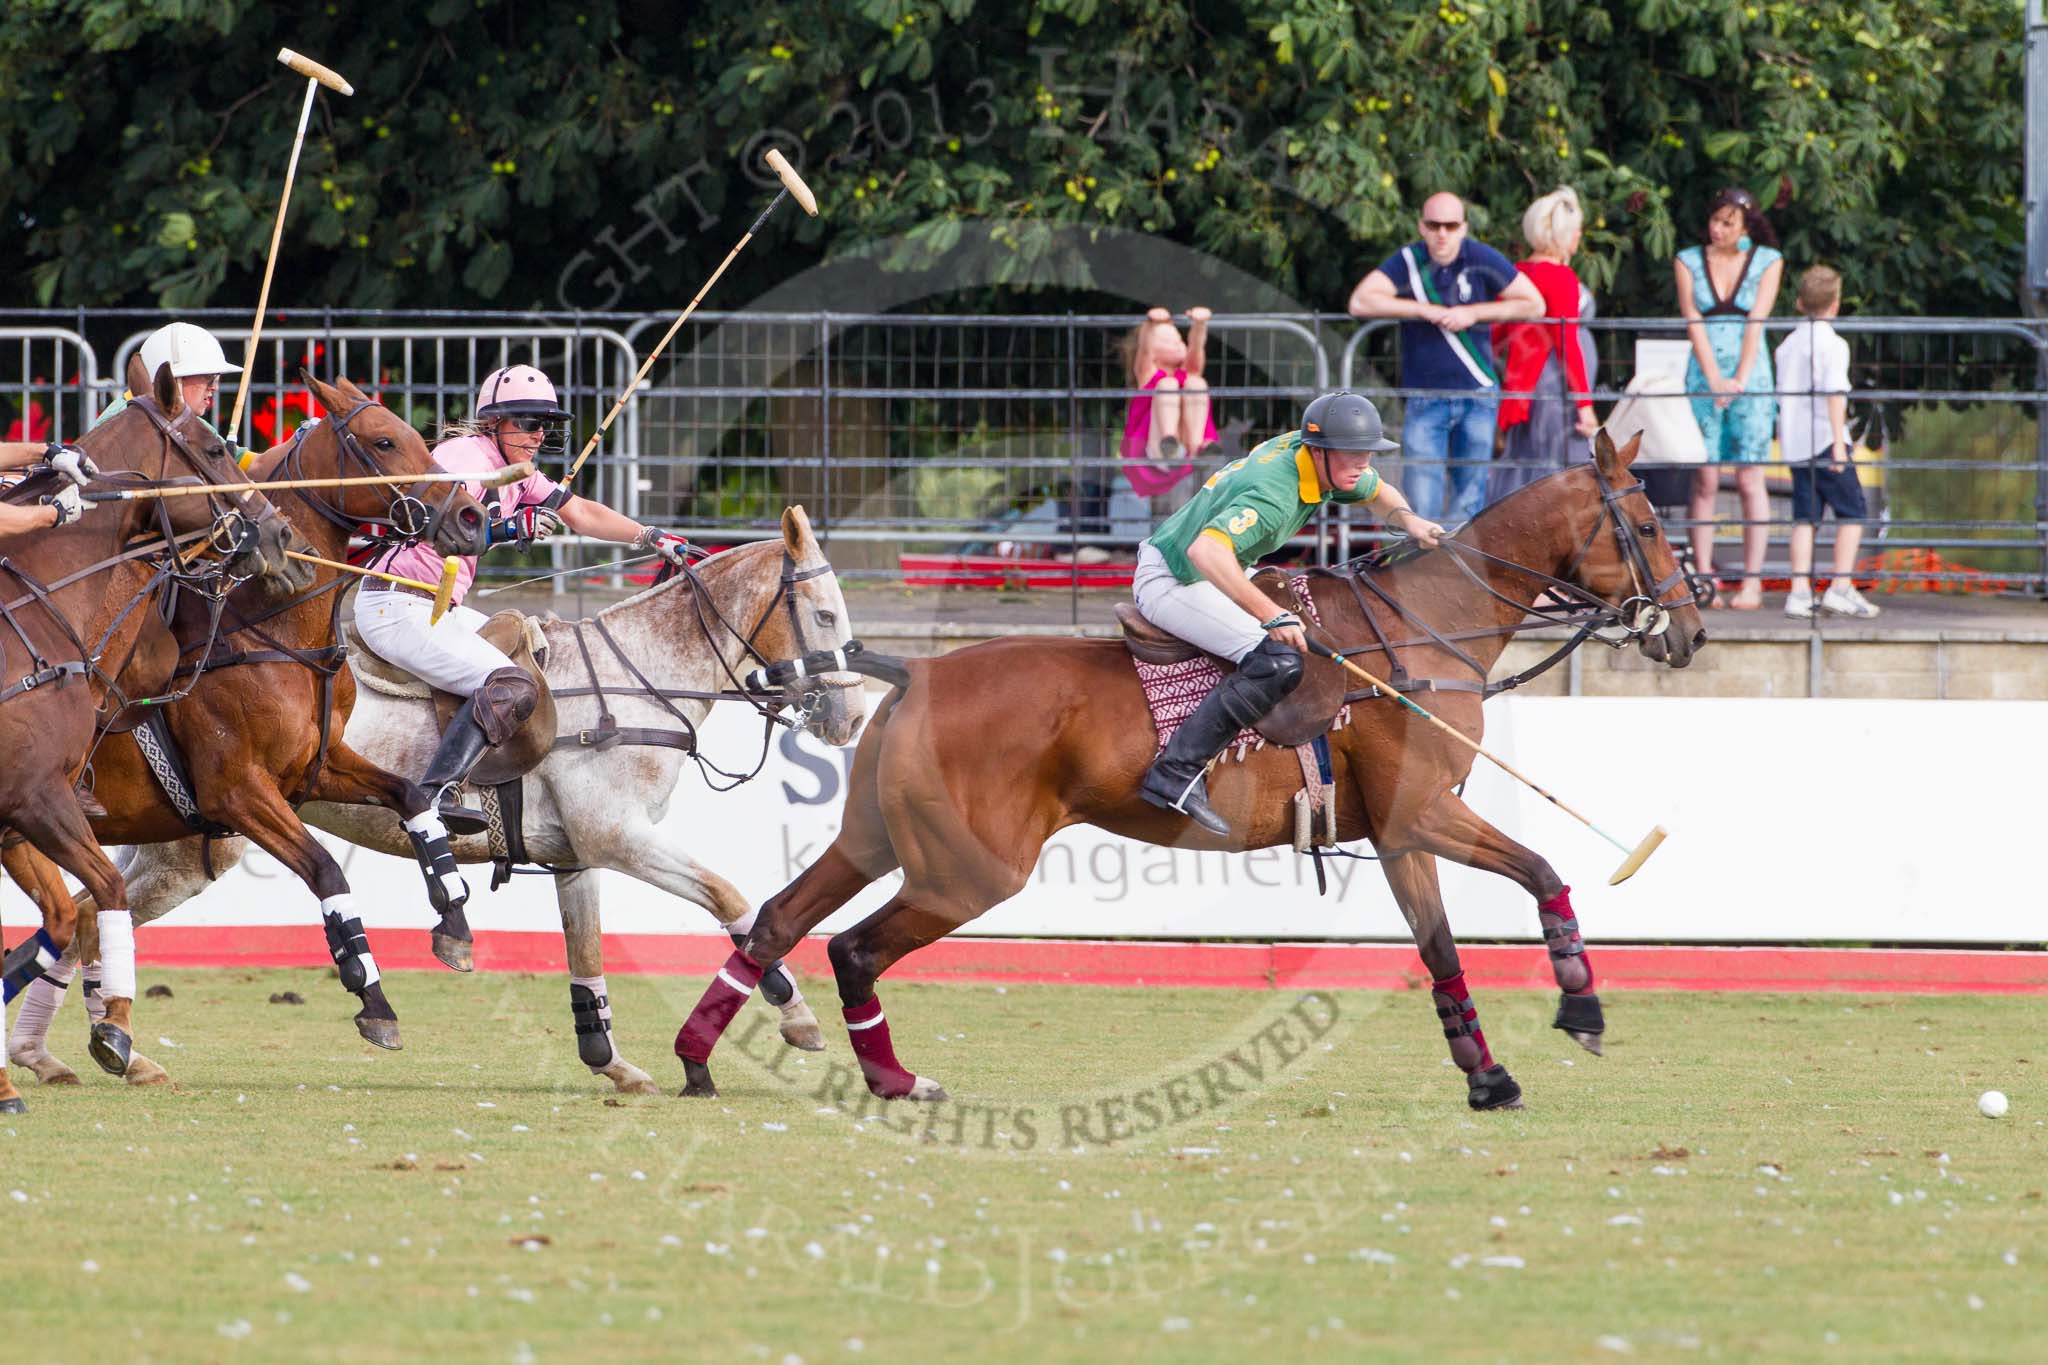 DBPC Polo in the Park 2013, Final of the Tusk Trophy (4 Goals), Rutland vs C.A.N.I..
Dallas Burston Polo Club, ,
Southam,
Warwickshire,
United Kingdom,
on 01 September 2013 at 17:06, image #632